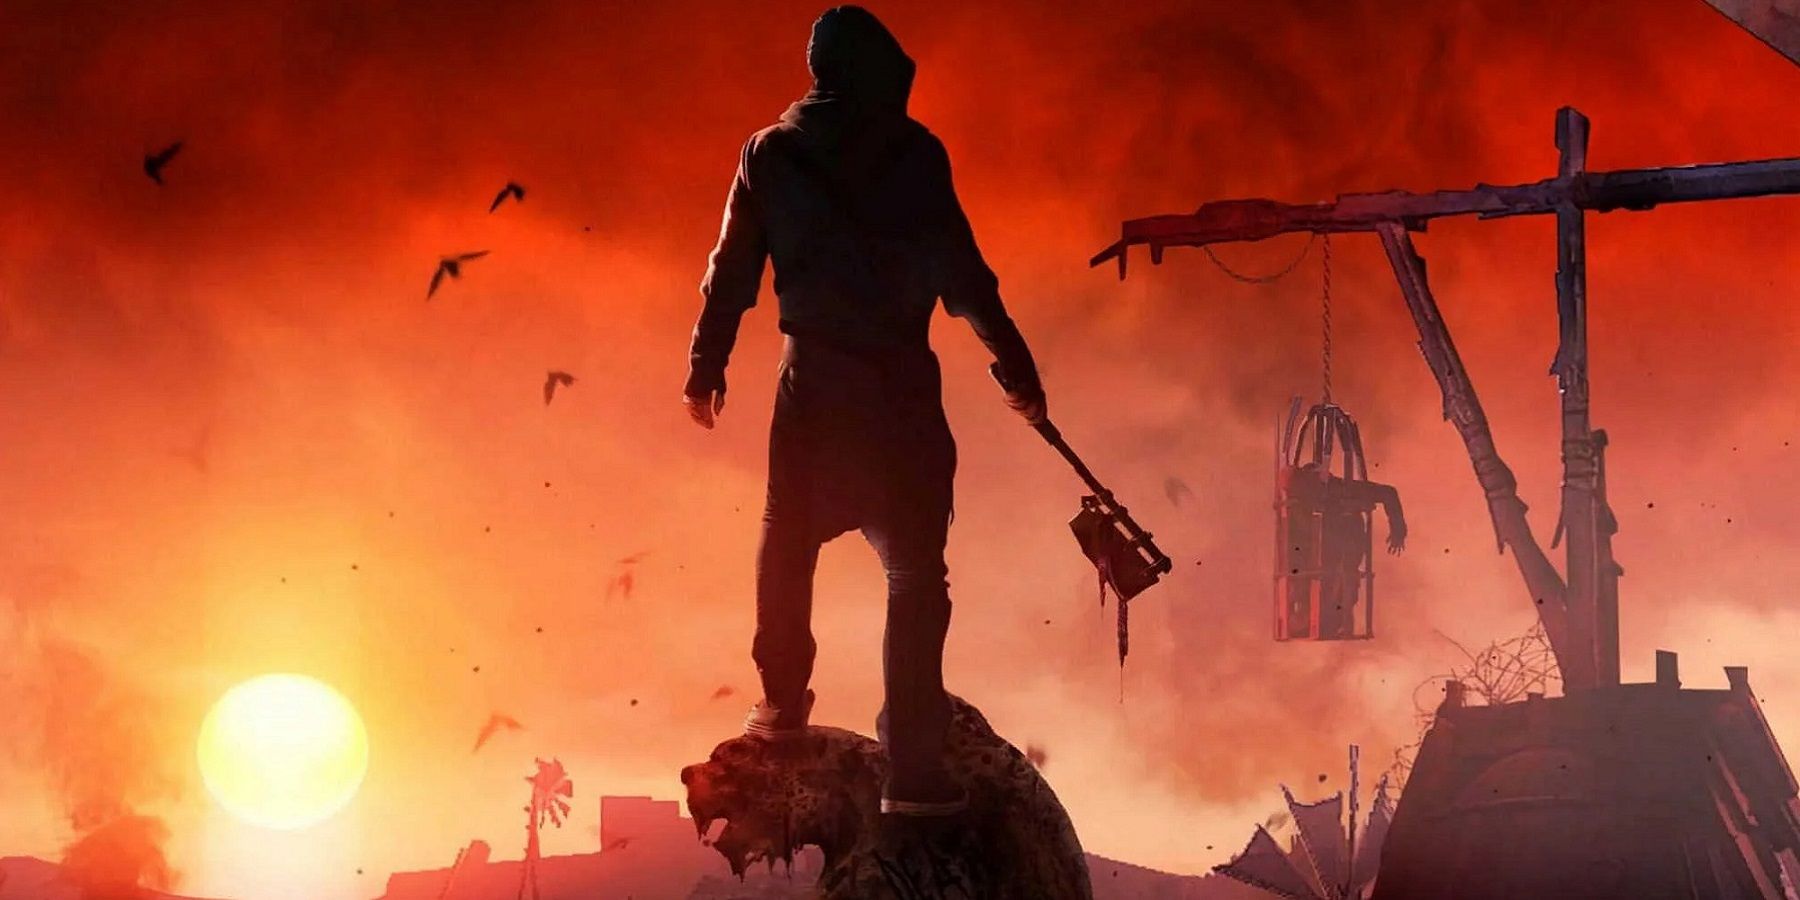 Image from Dying Light 2 showing a silhouette of the player stood on top of of gargoyle during sunset.